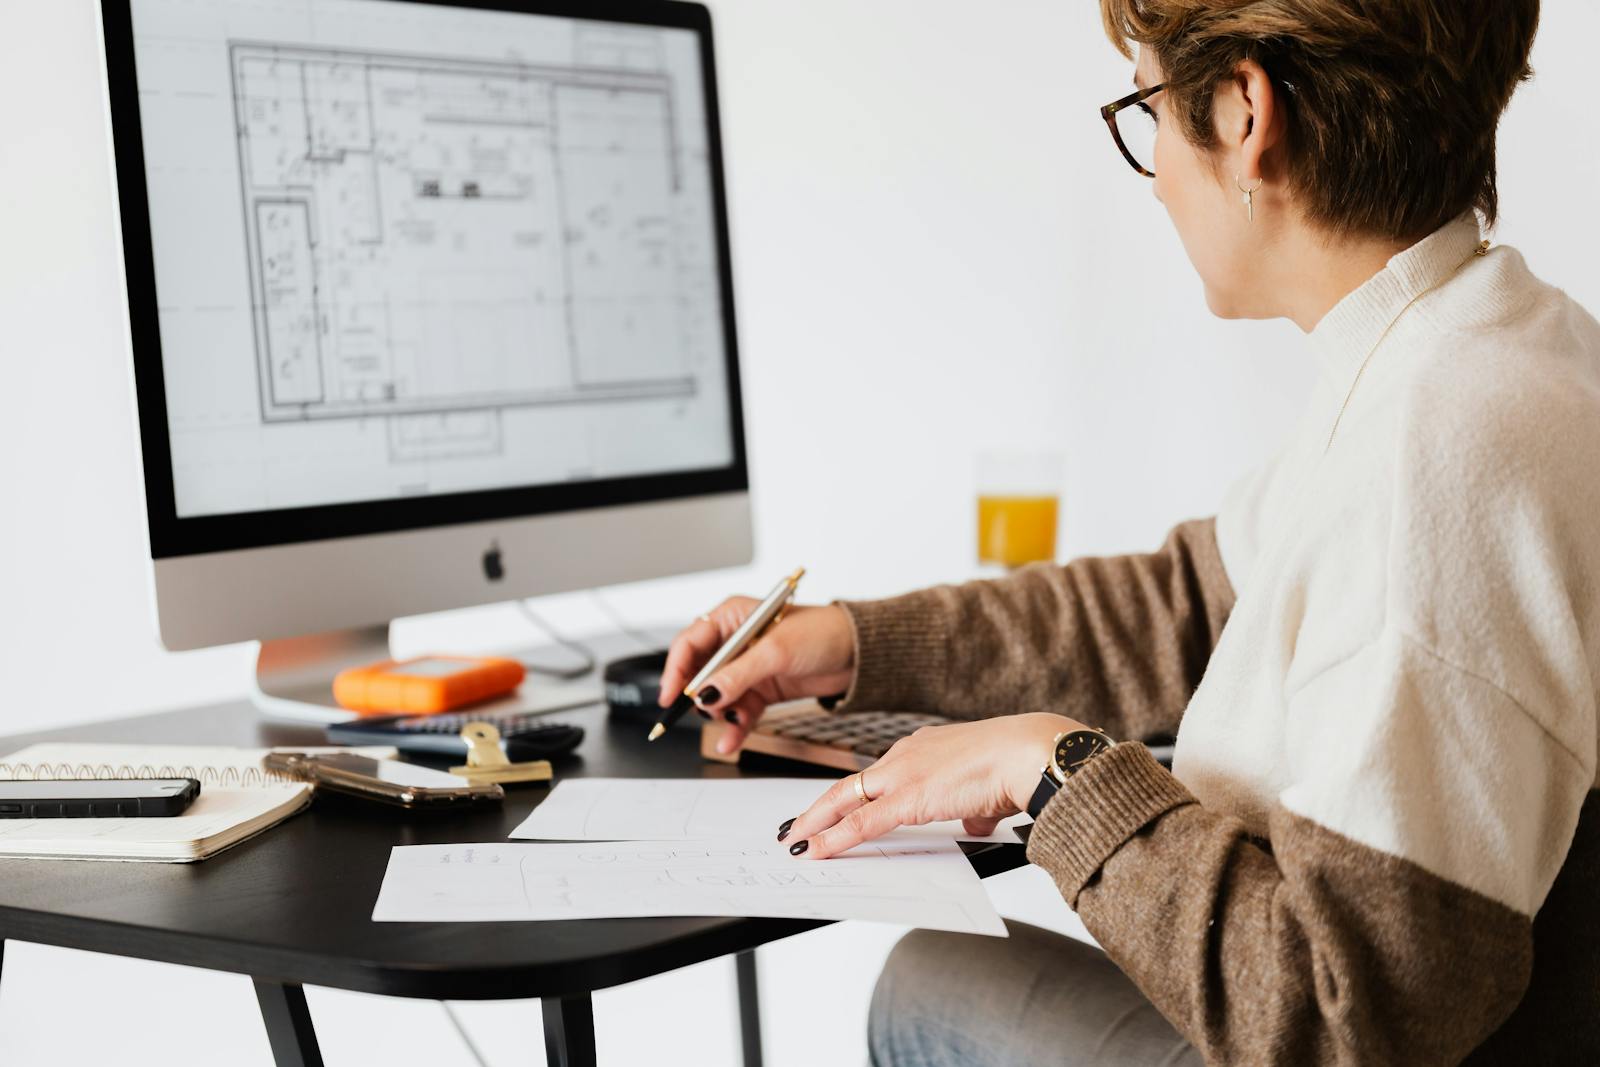 How Ebooks Can Help Create Your Home’s Design Plan